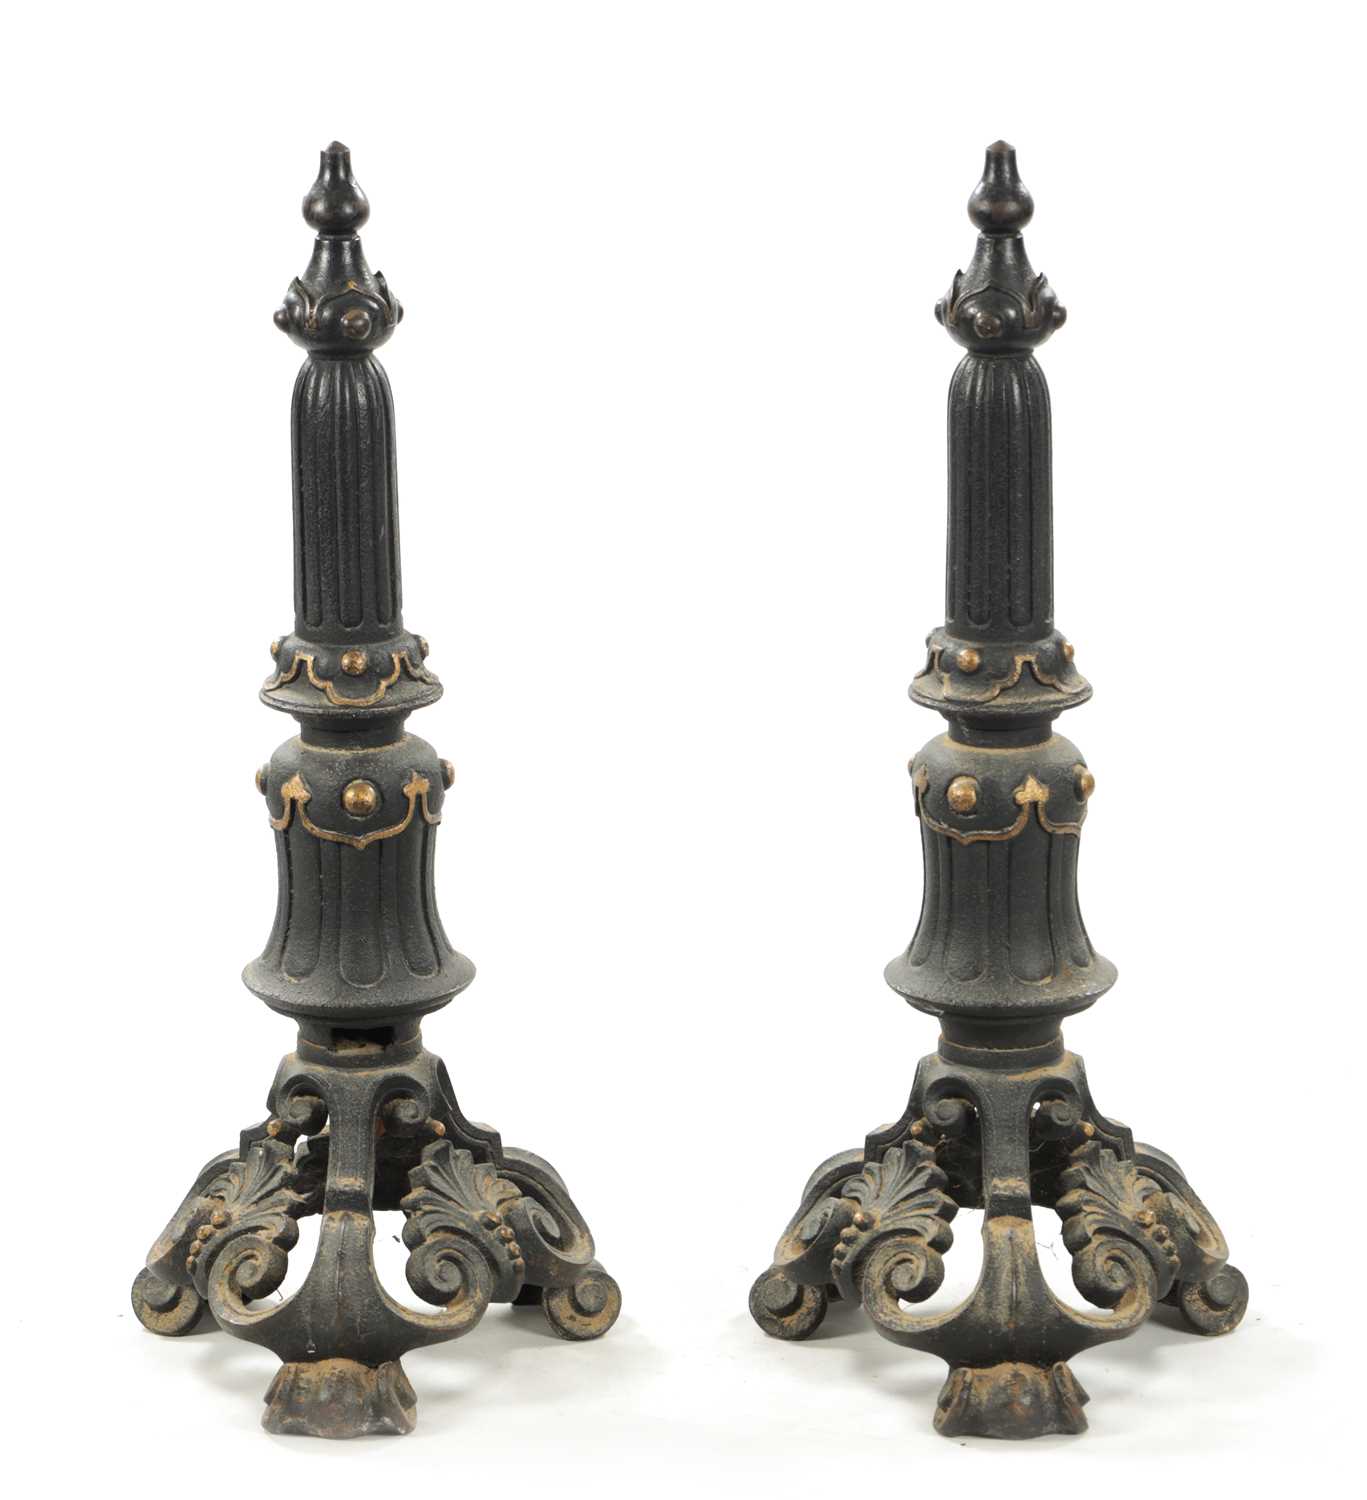 A PAIR OF LATE 19TH CENTURY CAST IRON FIRE DOGS